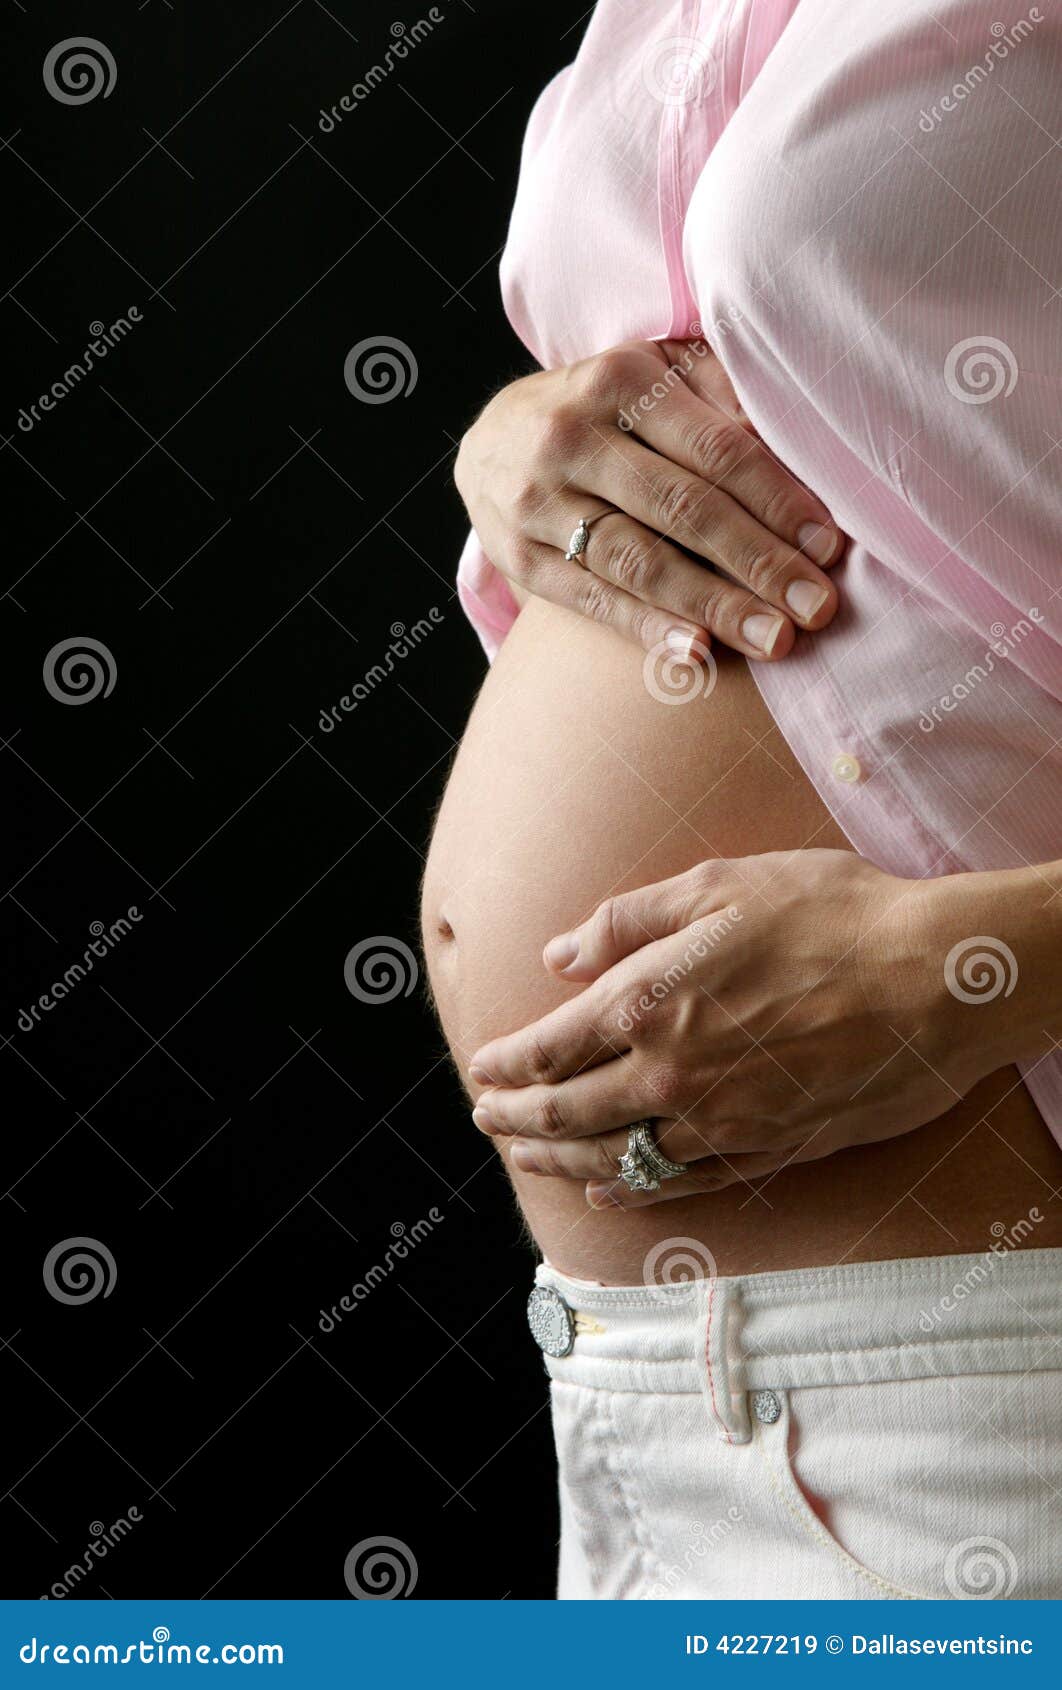 Woman Caressing Pregnant Belly Sideview Stock Image ...